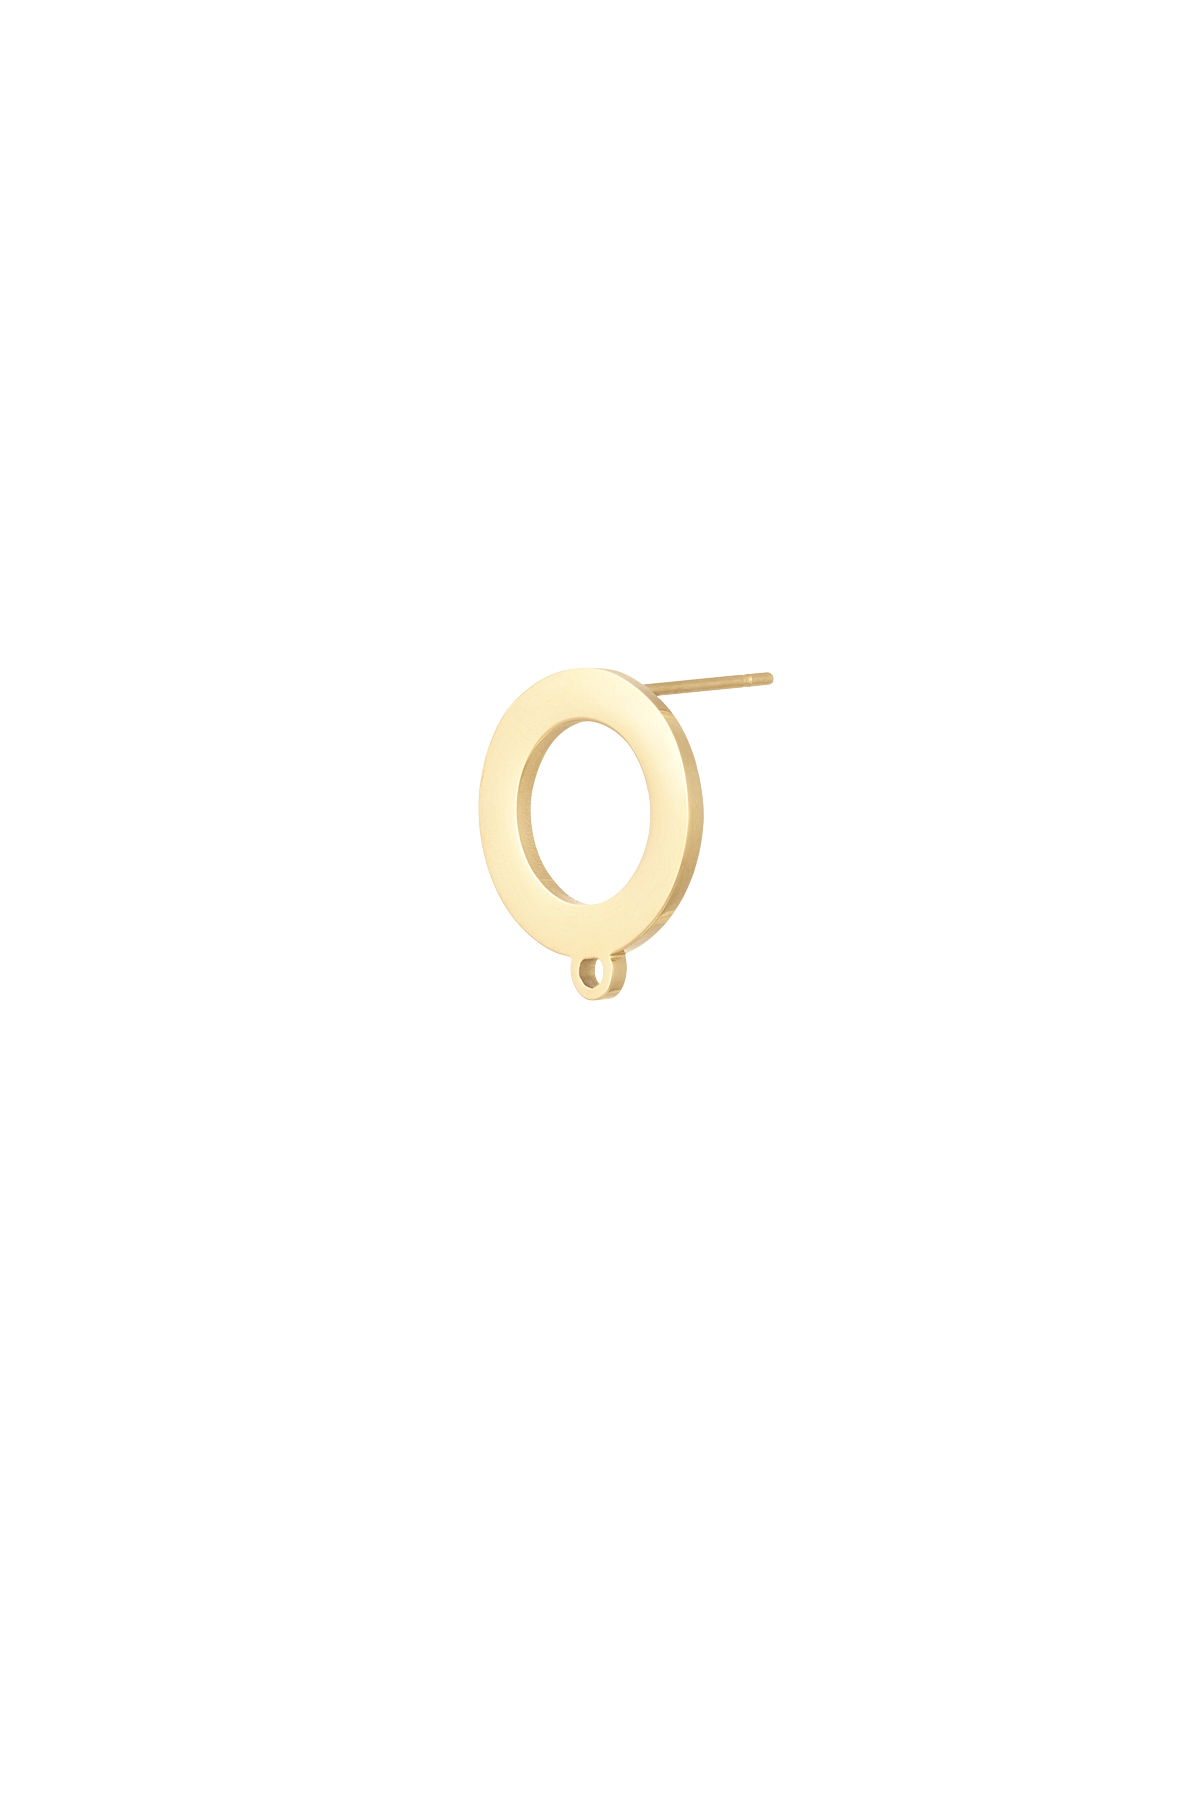 Ear stud part circle - gold Stainless Steel h5 